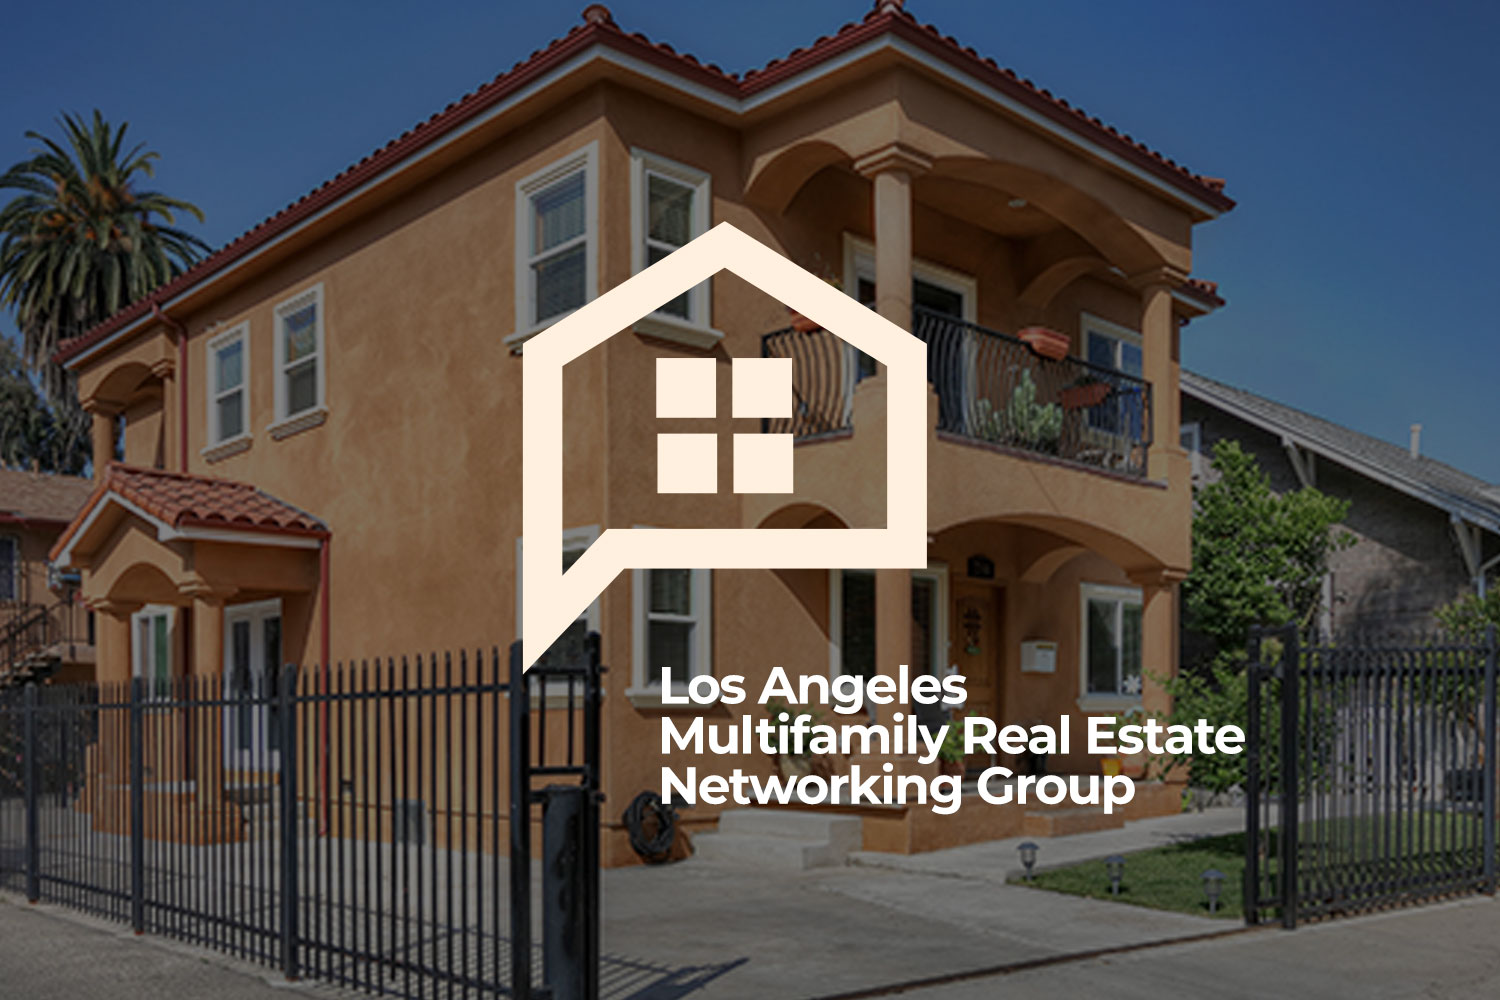 October 2016 Meeting: LA Multifamily Real Estate Networking